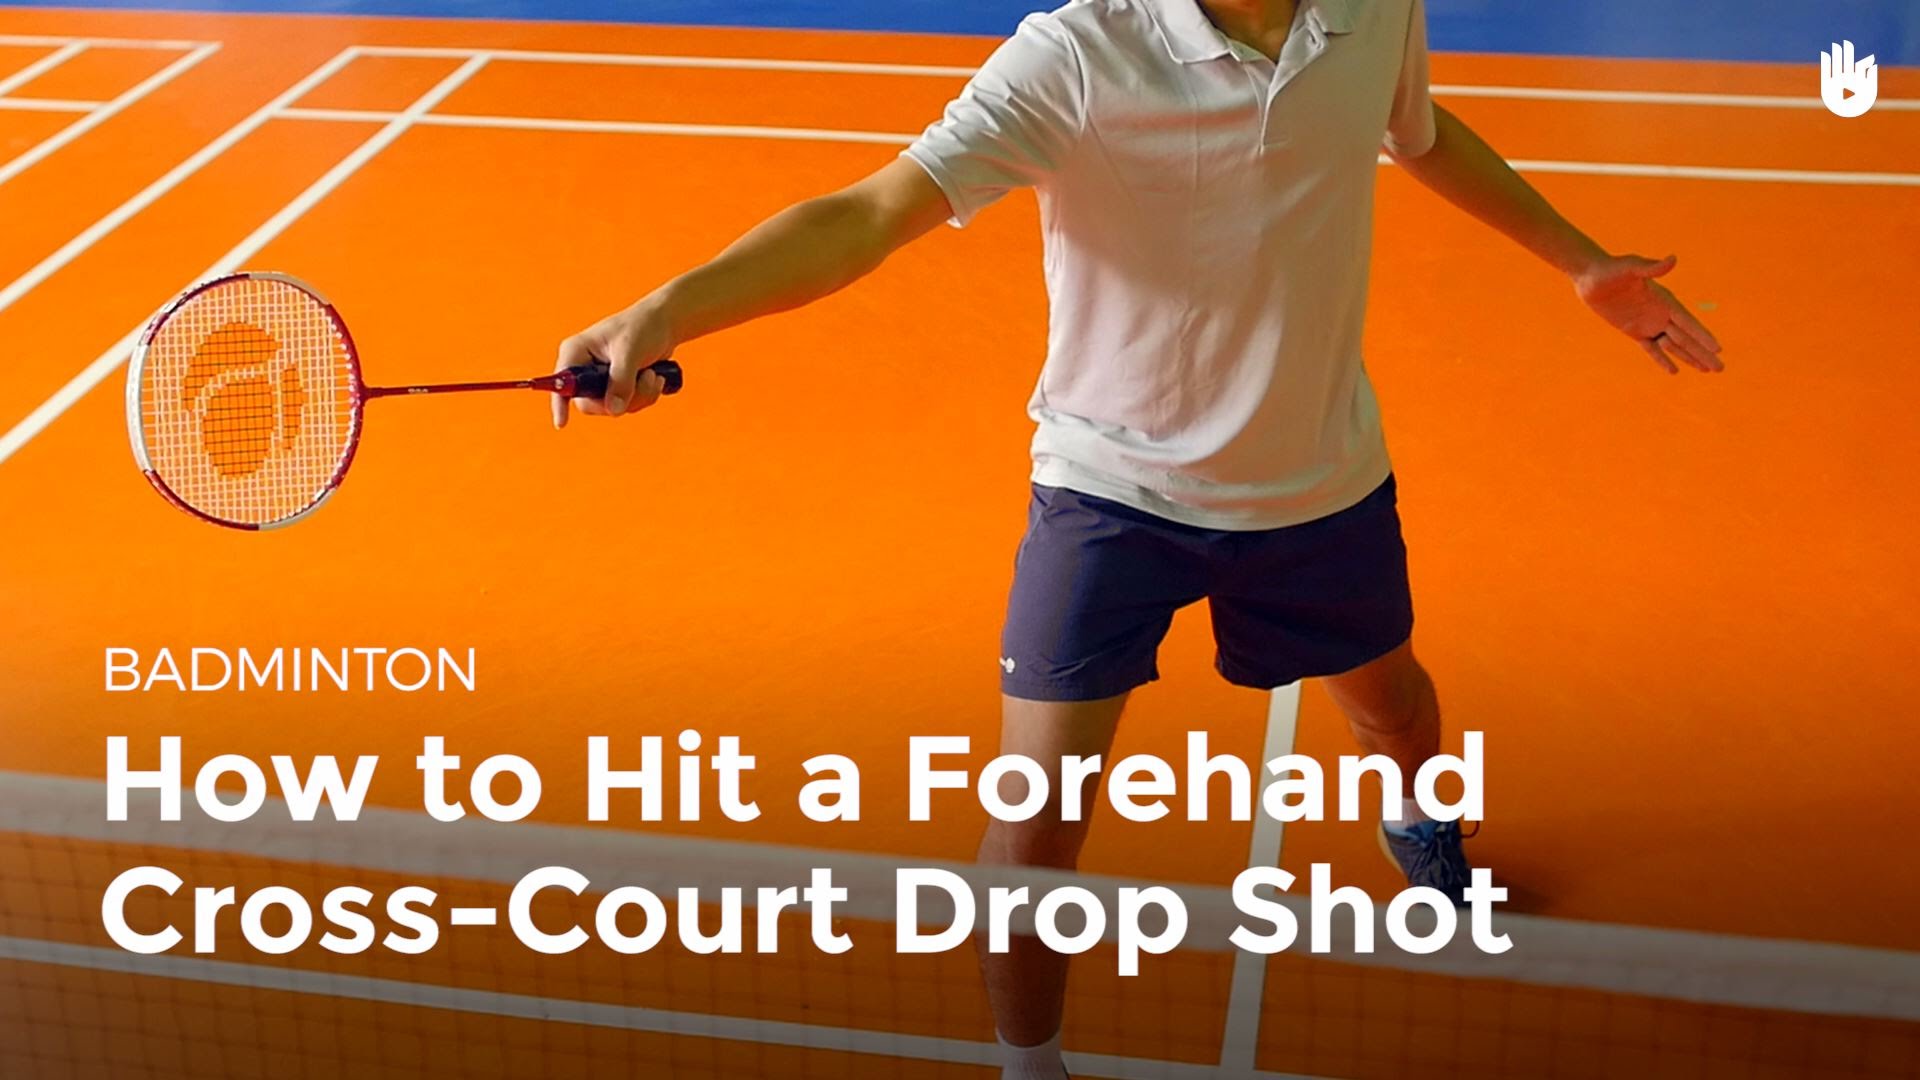 How to Hit a Forehand Cross-Court Drop Shot | Badminton - YouTube